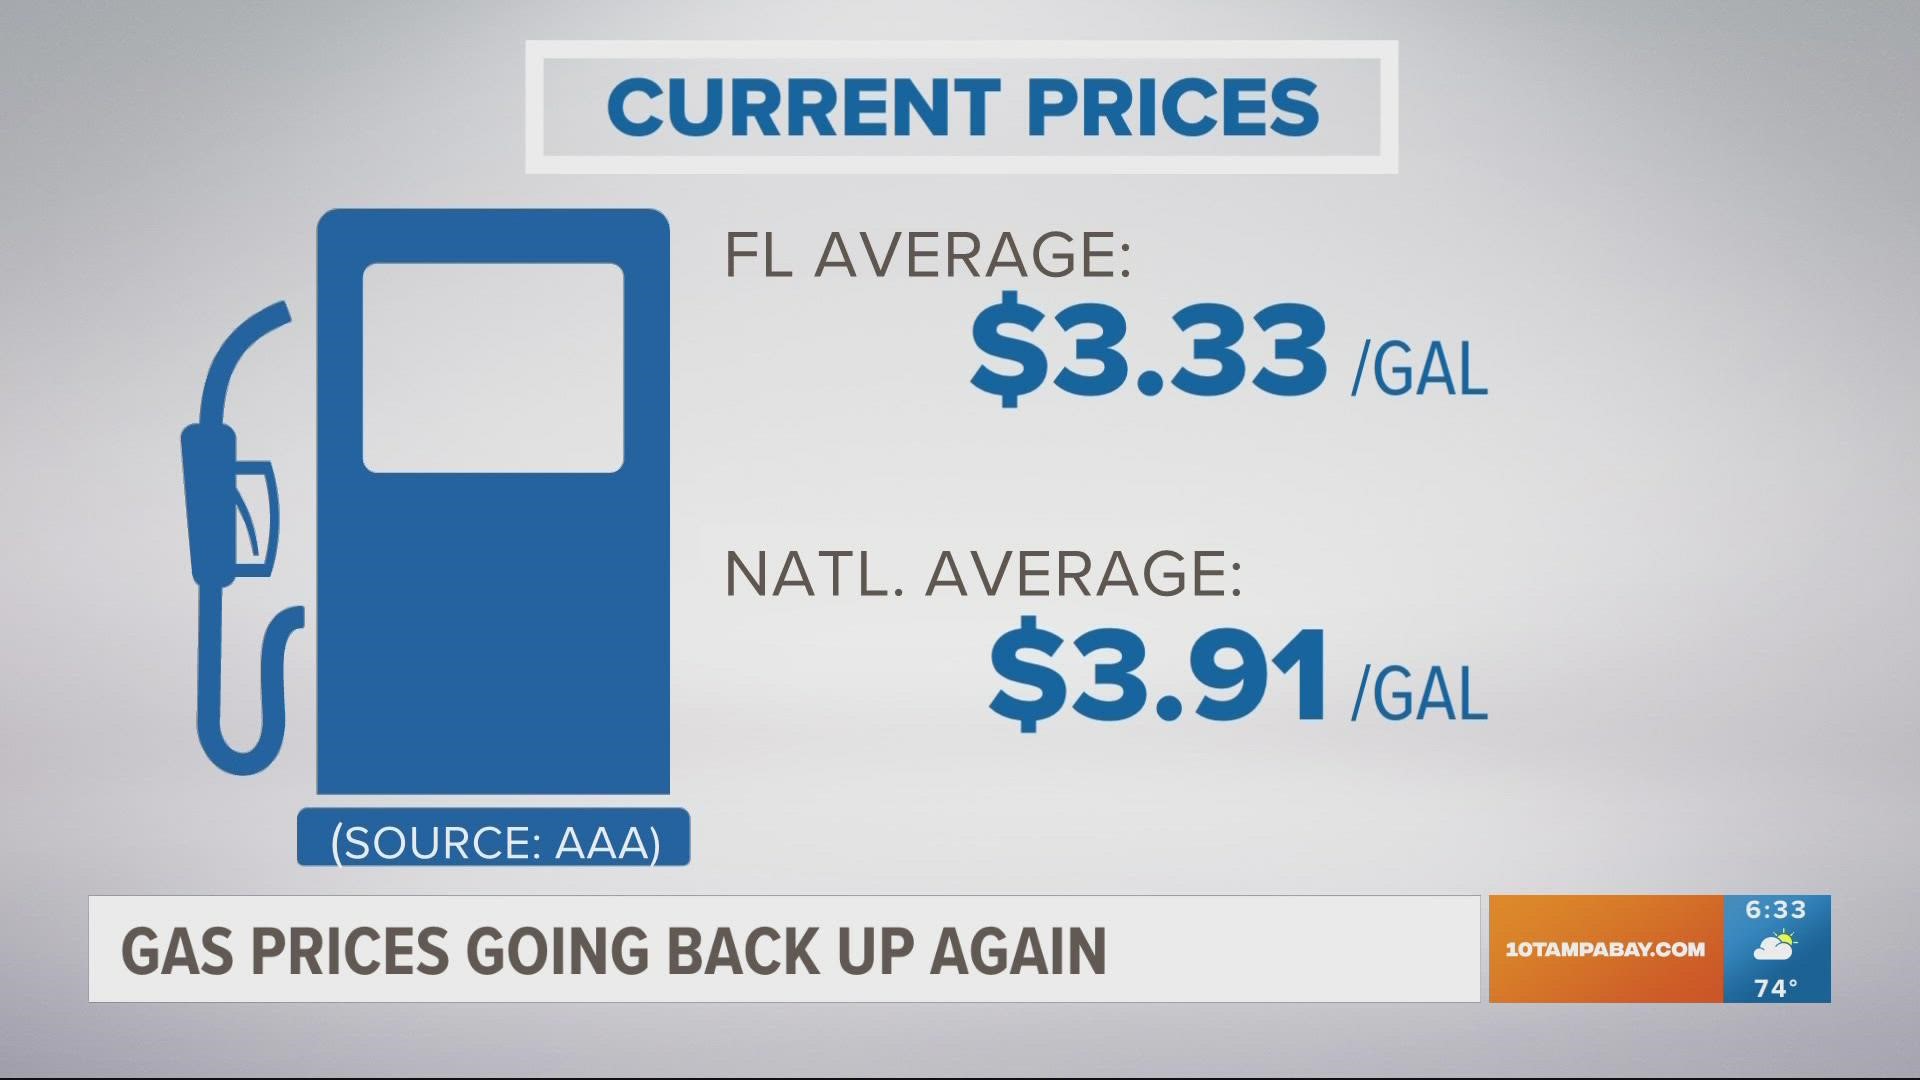 The average gas price in Florida is about $3.33 per gallon.